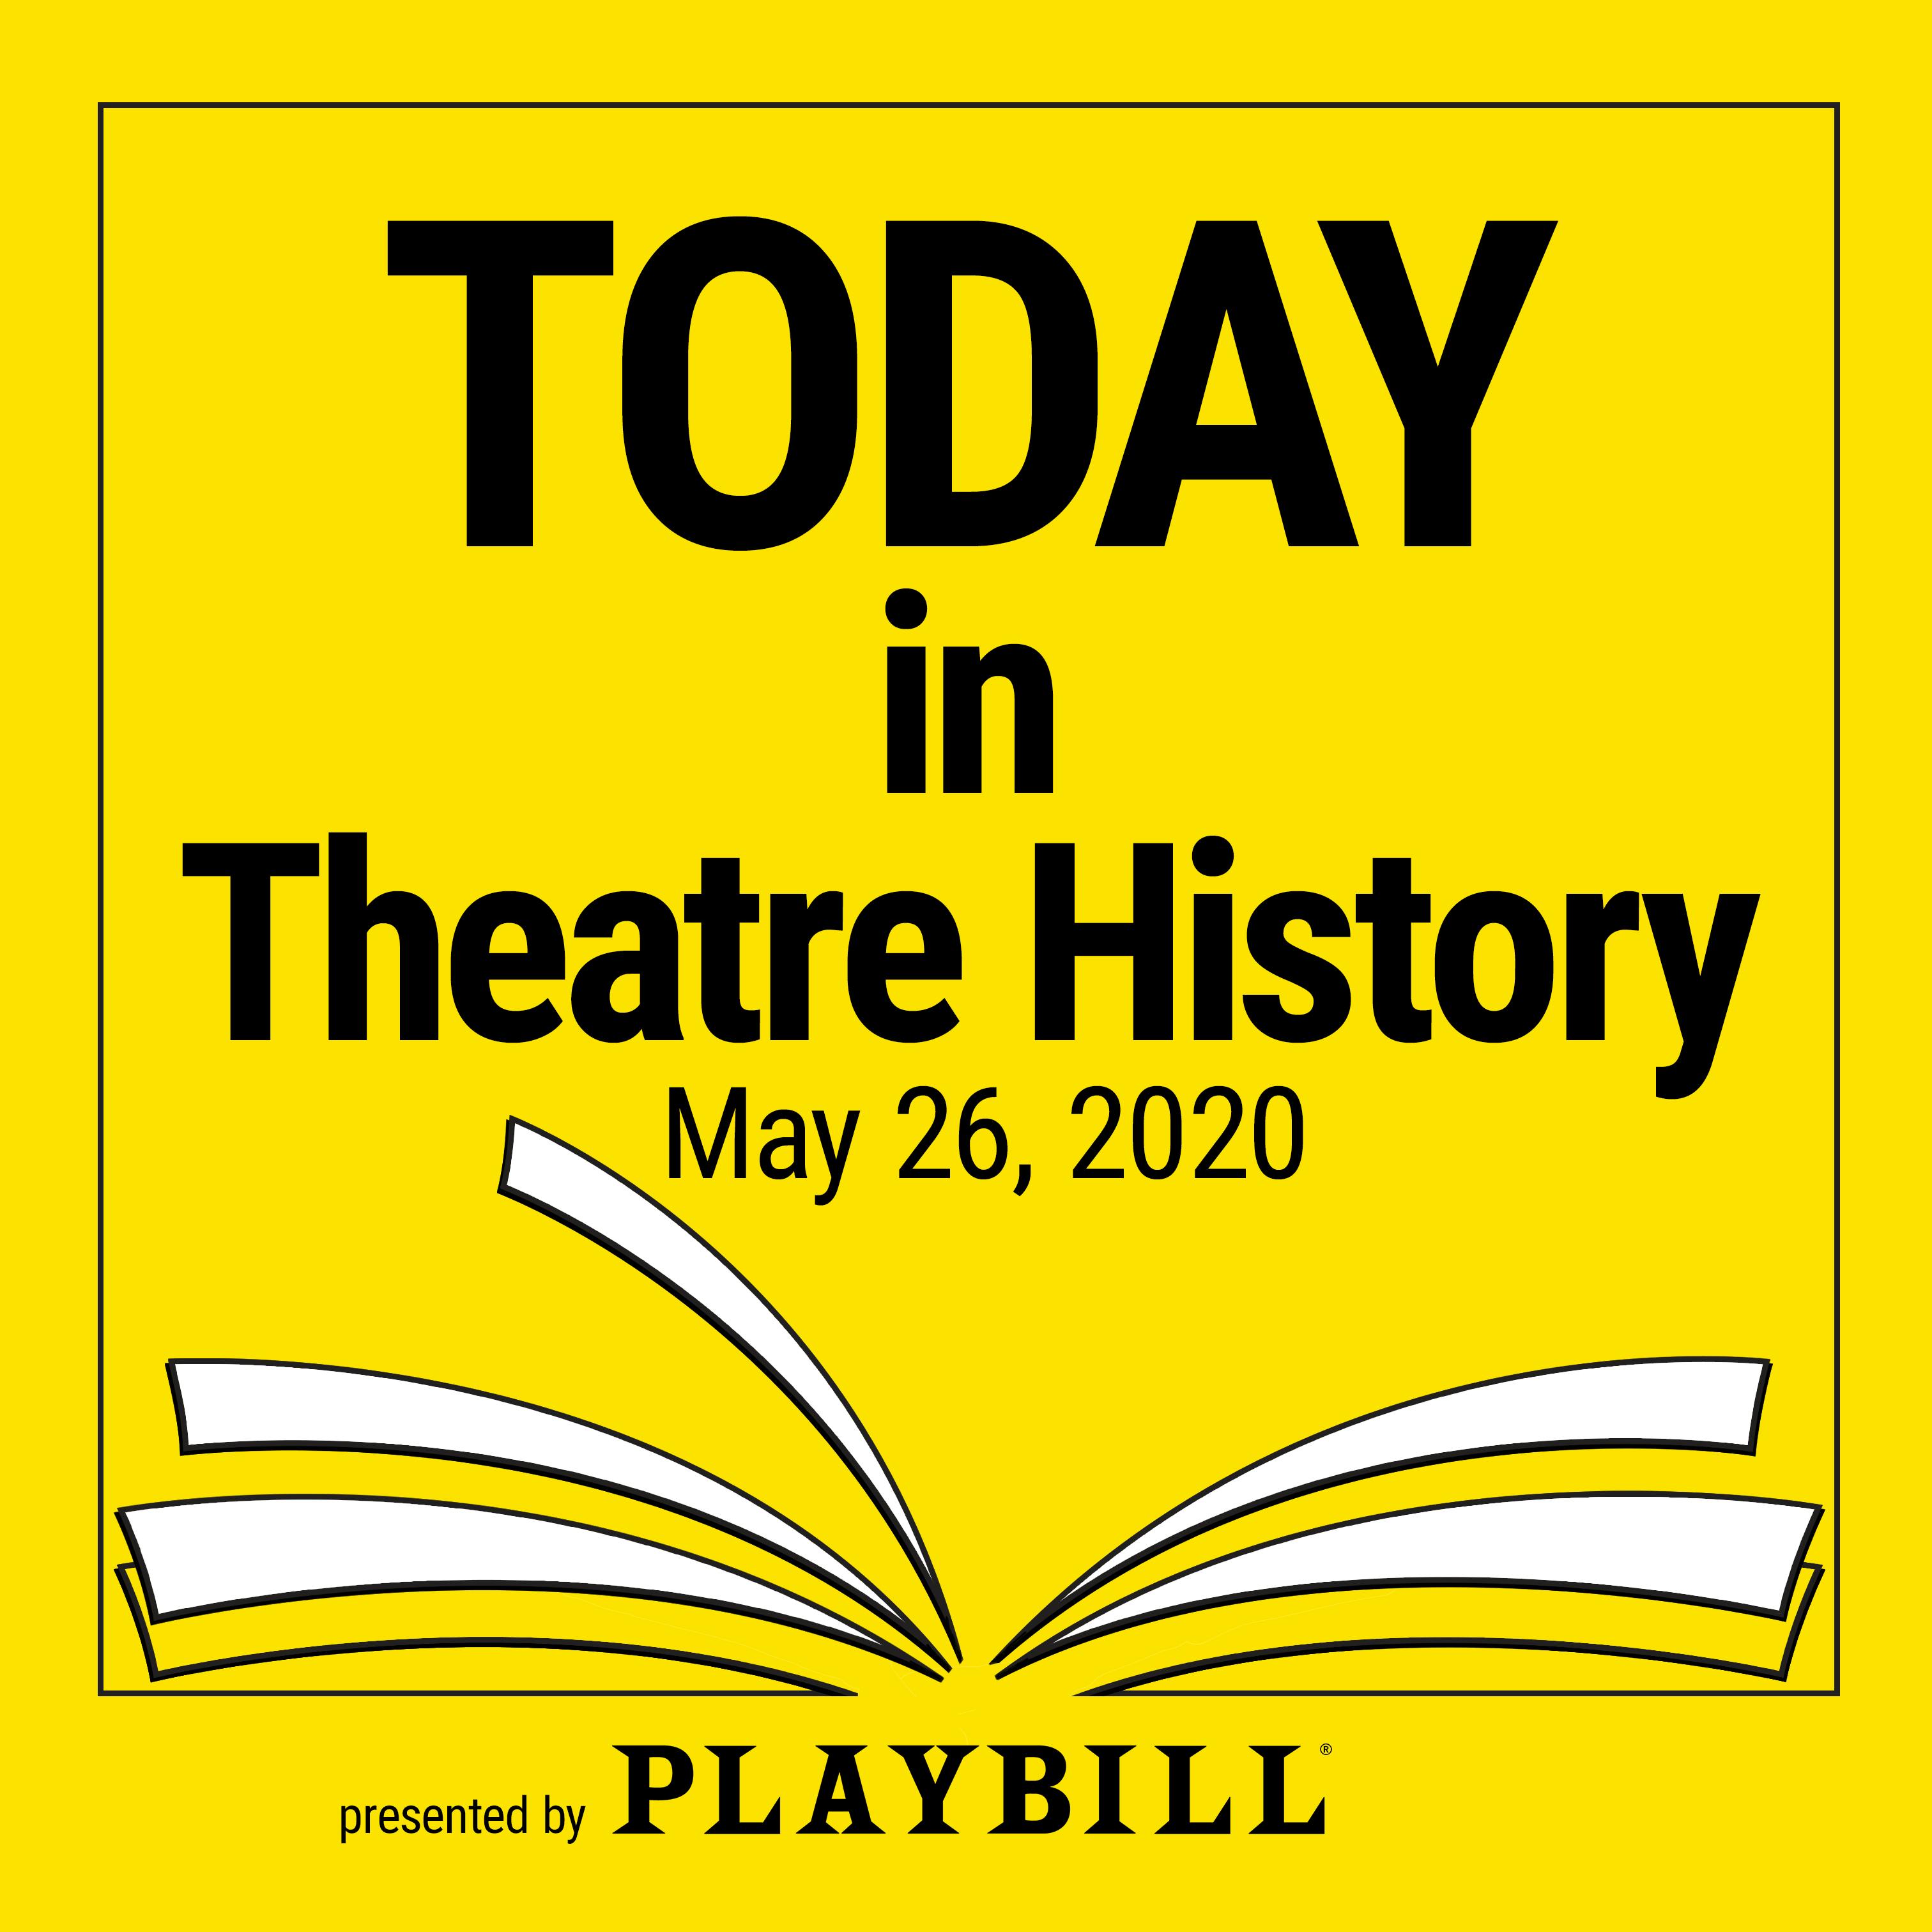 May 26, 2020: Carol Burnett came to Broadway in her second musical, Fade Out - Fade In, which has one of the best scores you’ve probably never heard.